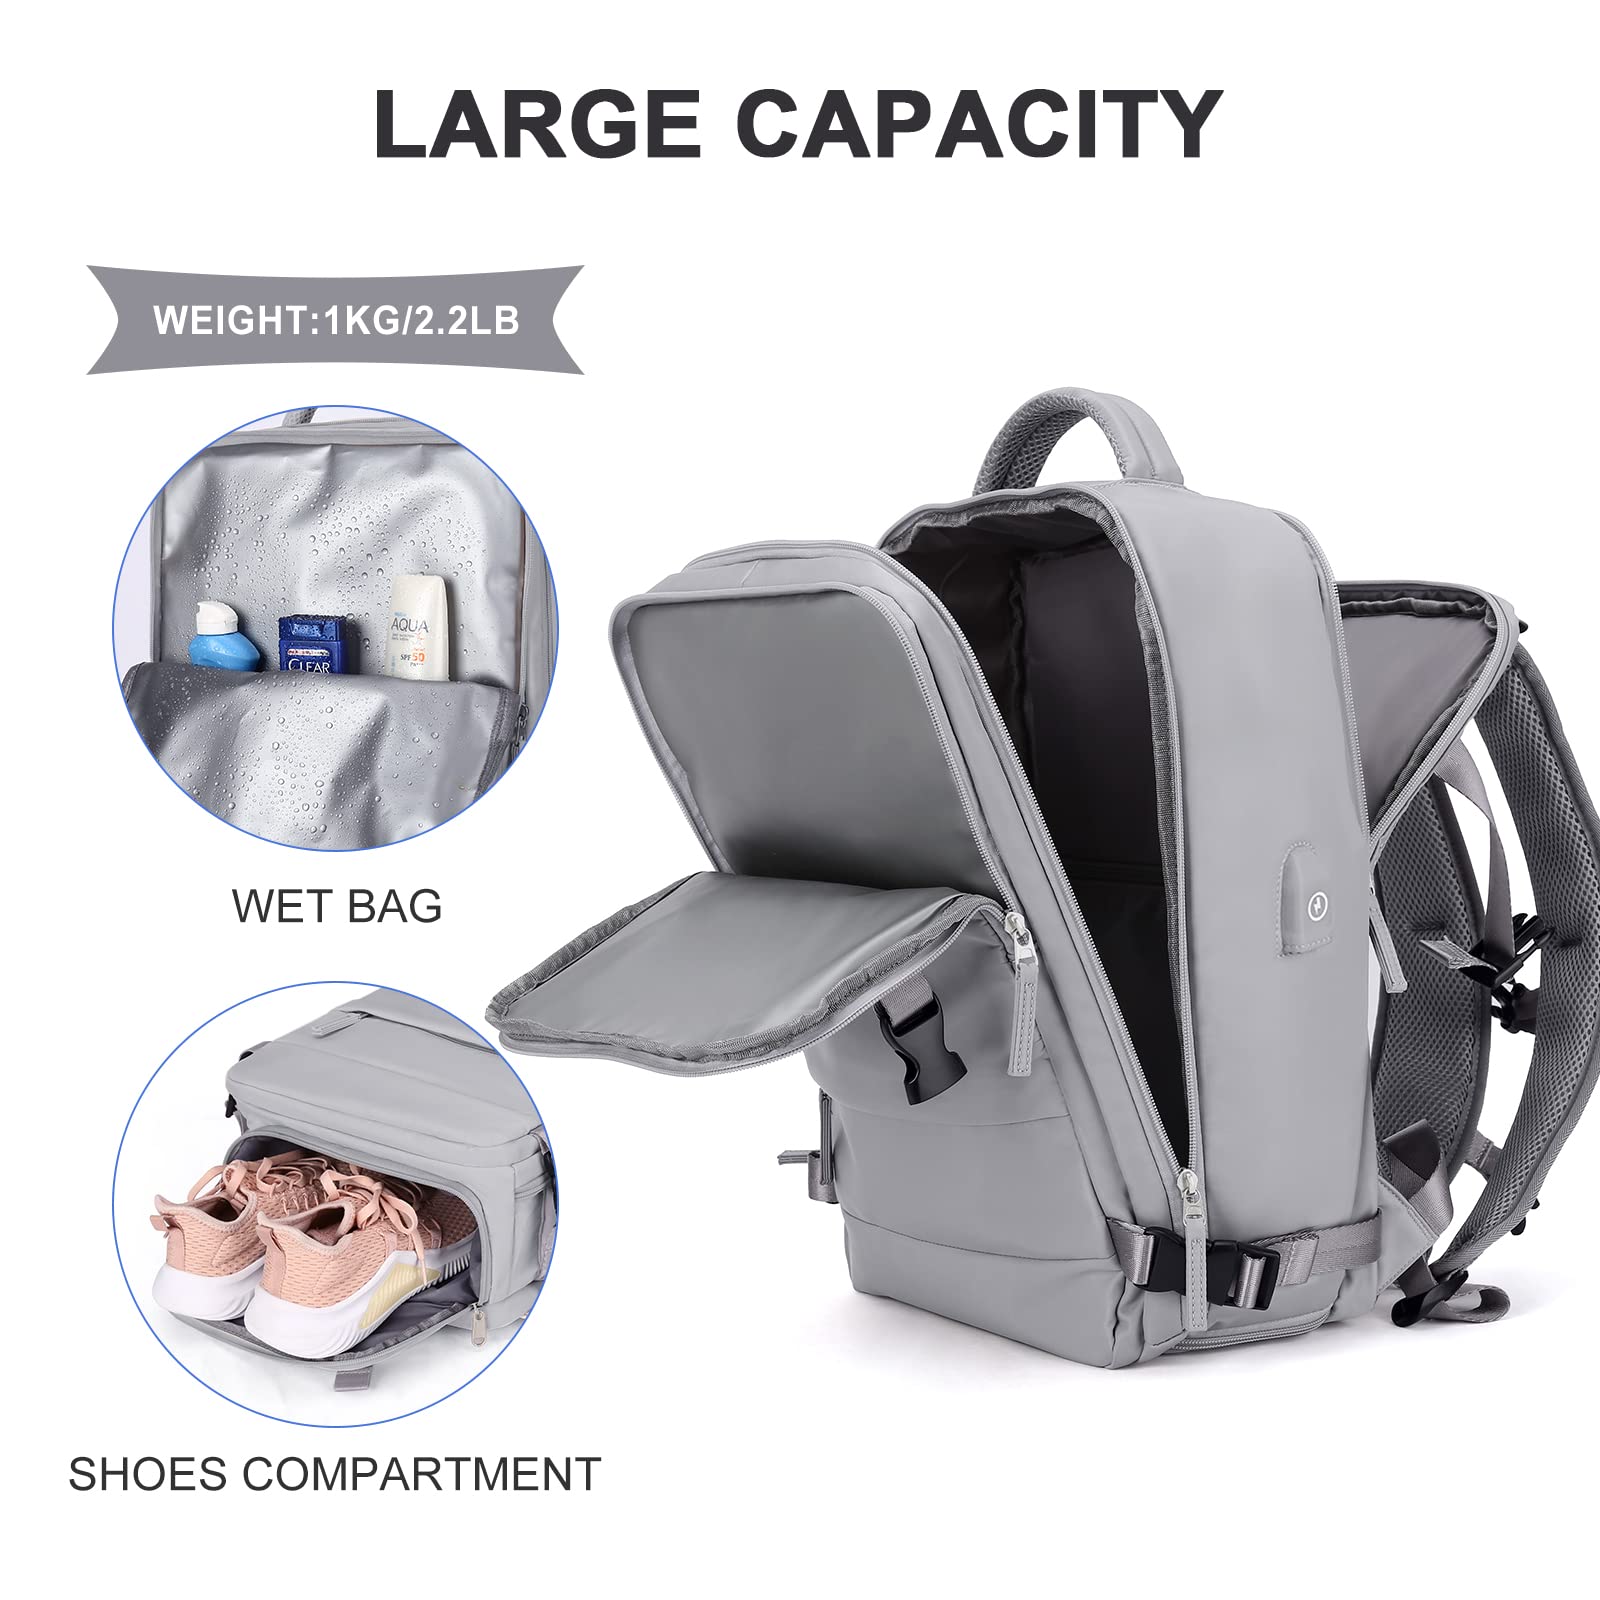 Large Travel Backpack Women, Carry On Backpack,Hiking Backpack Waterproof Outdoor Sports Rucksack Casual Daypack School Bag Fit 14 Inch Laptop with USB Charging Port Shoes Compartment color Grey